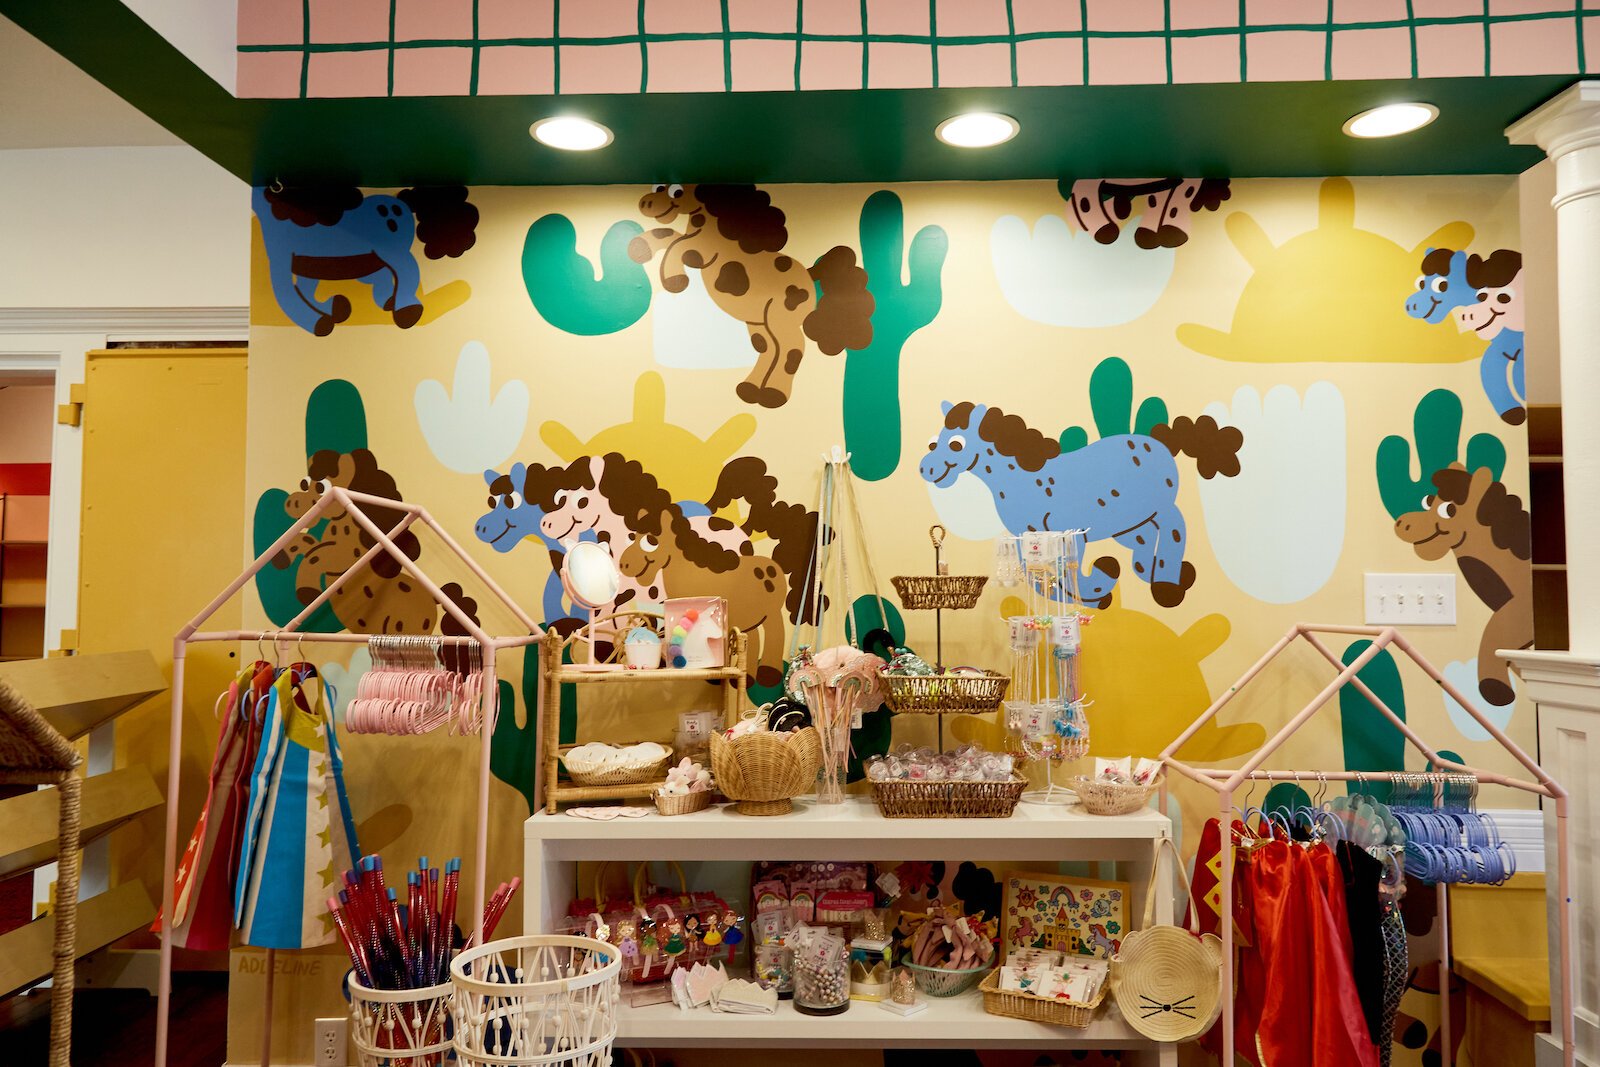 Hopscotch House will carry a variety of unique toys and items for children of all ages.